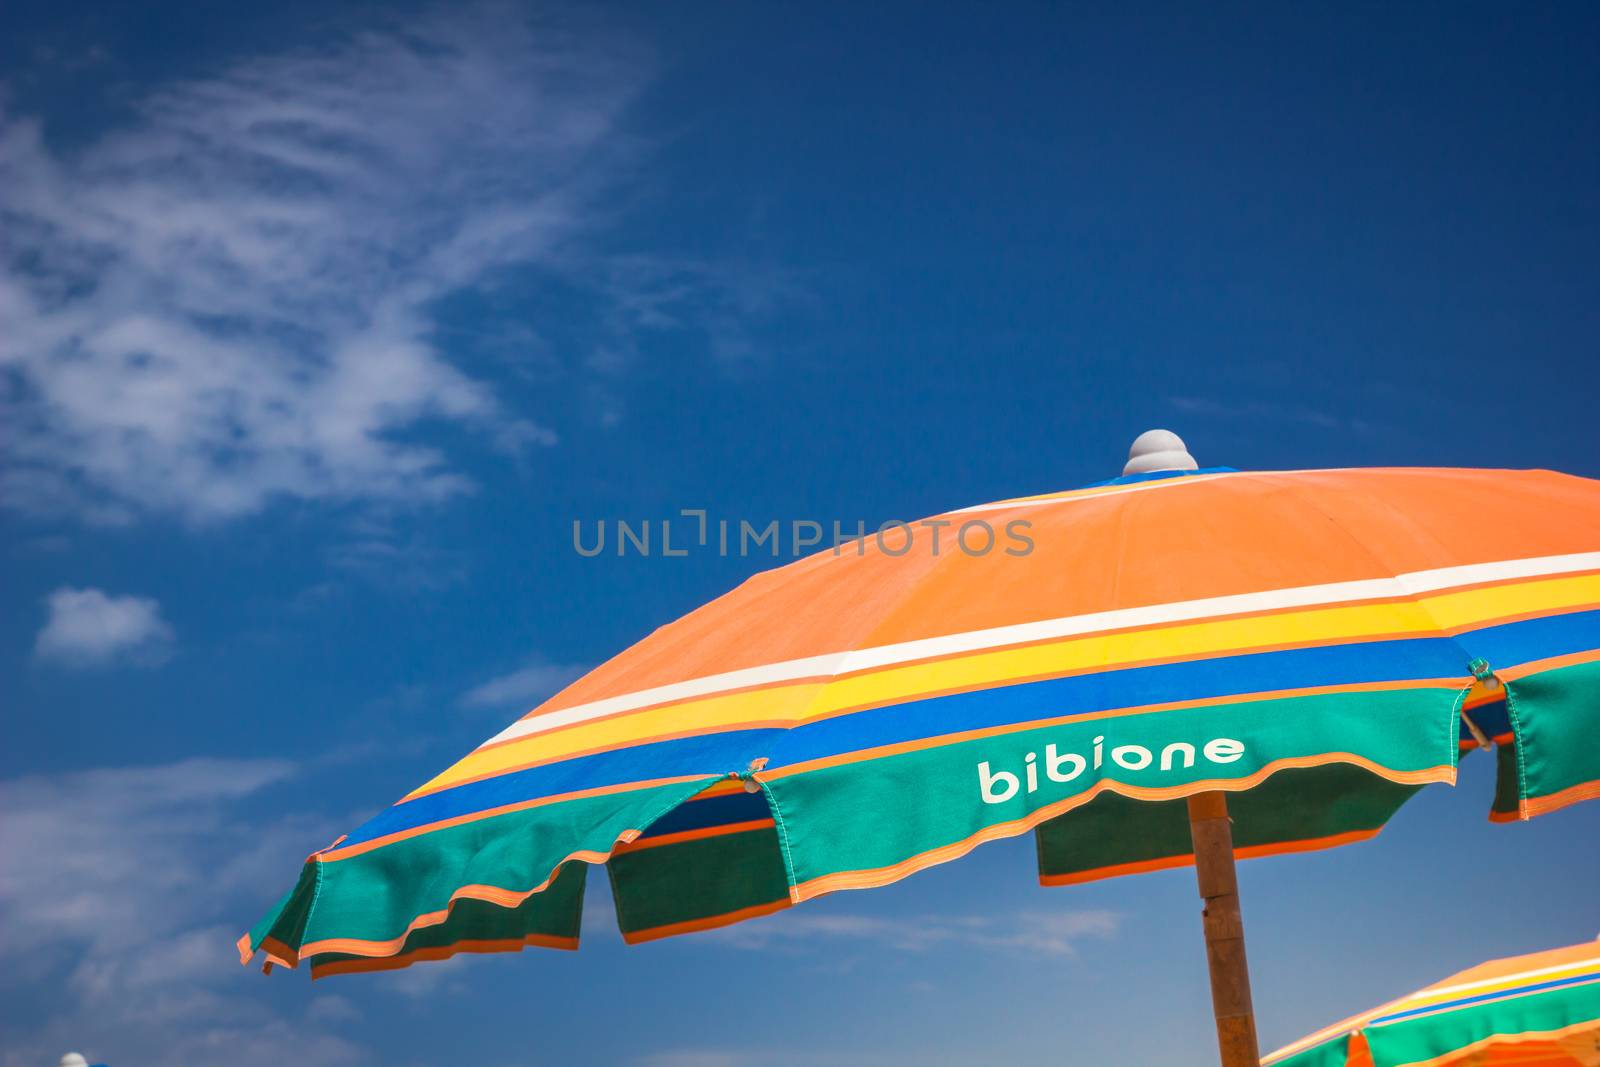 Umbrella beach for relaxing and sun set beach. Bibione, Italy